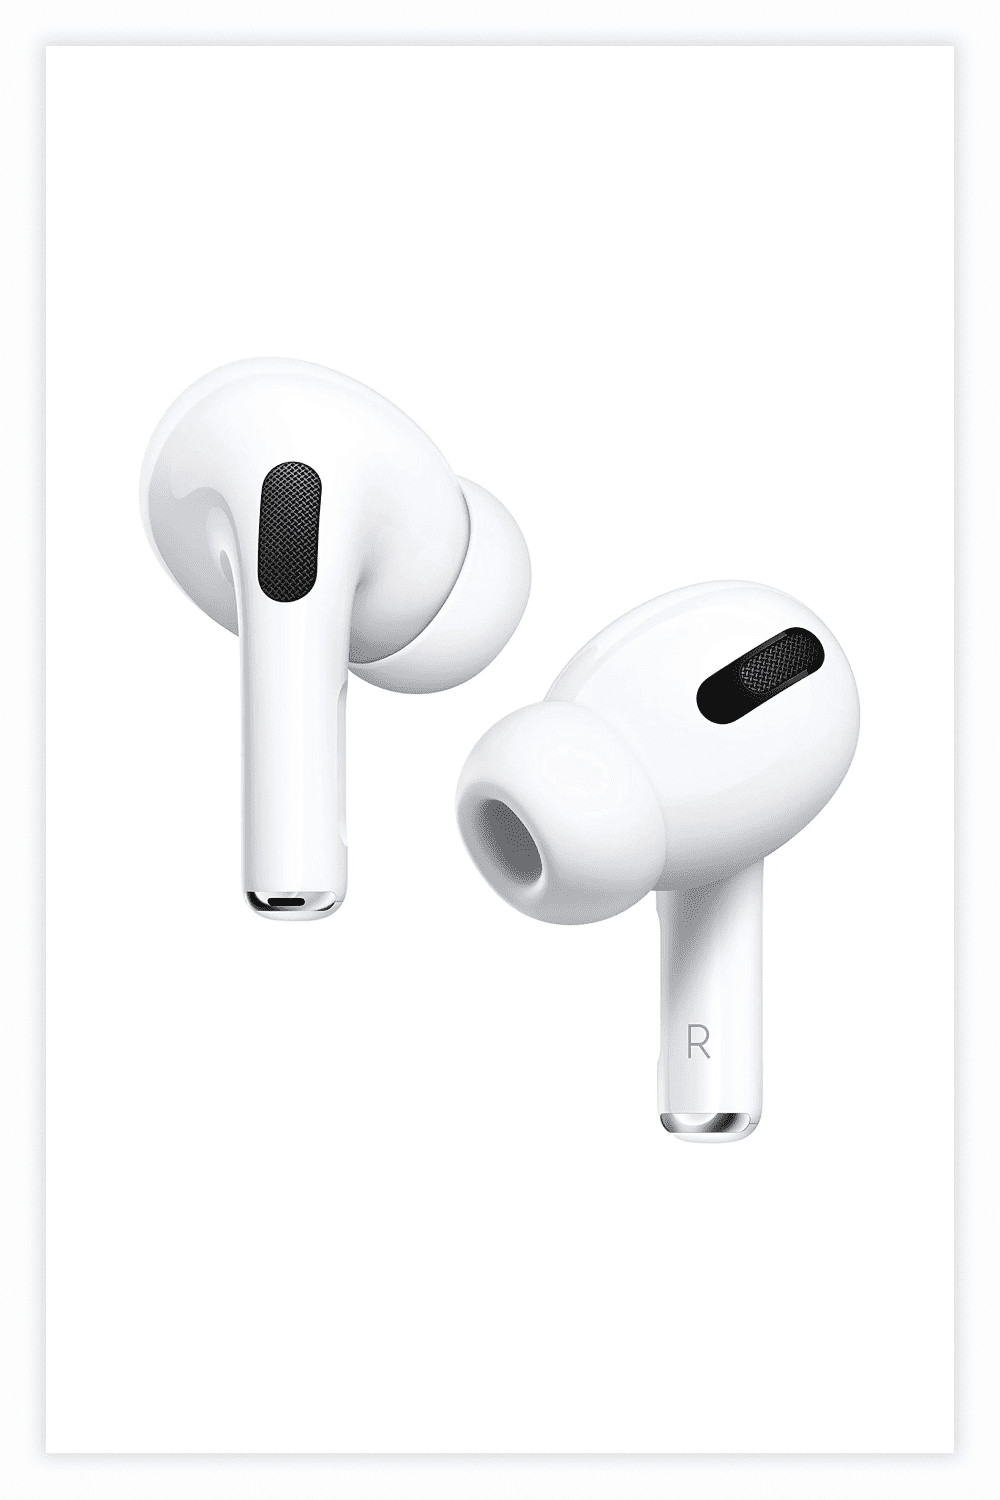 Photo of the white Apple airpods Pro.